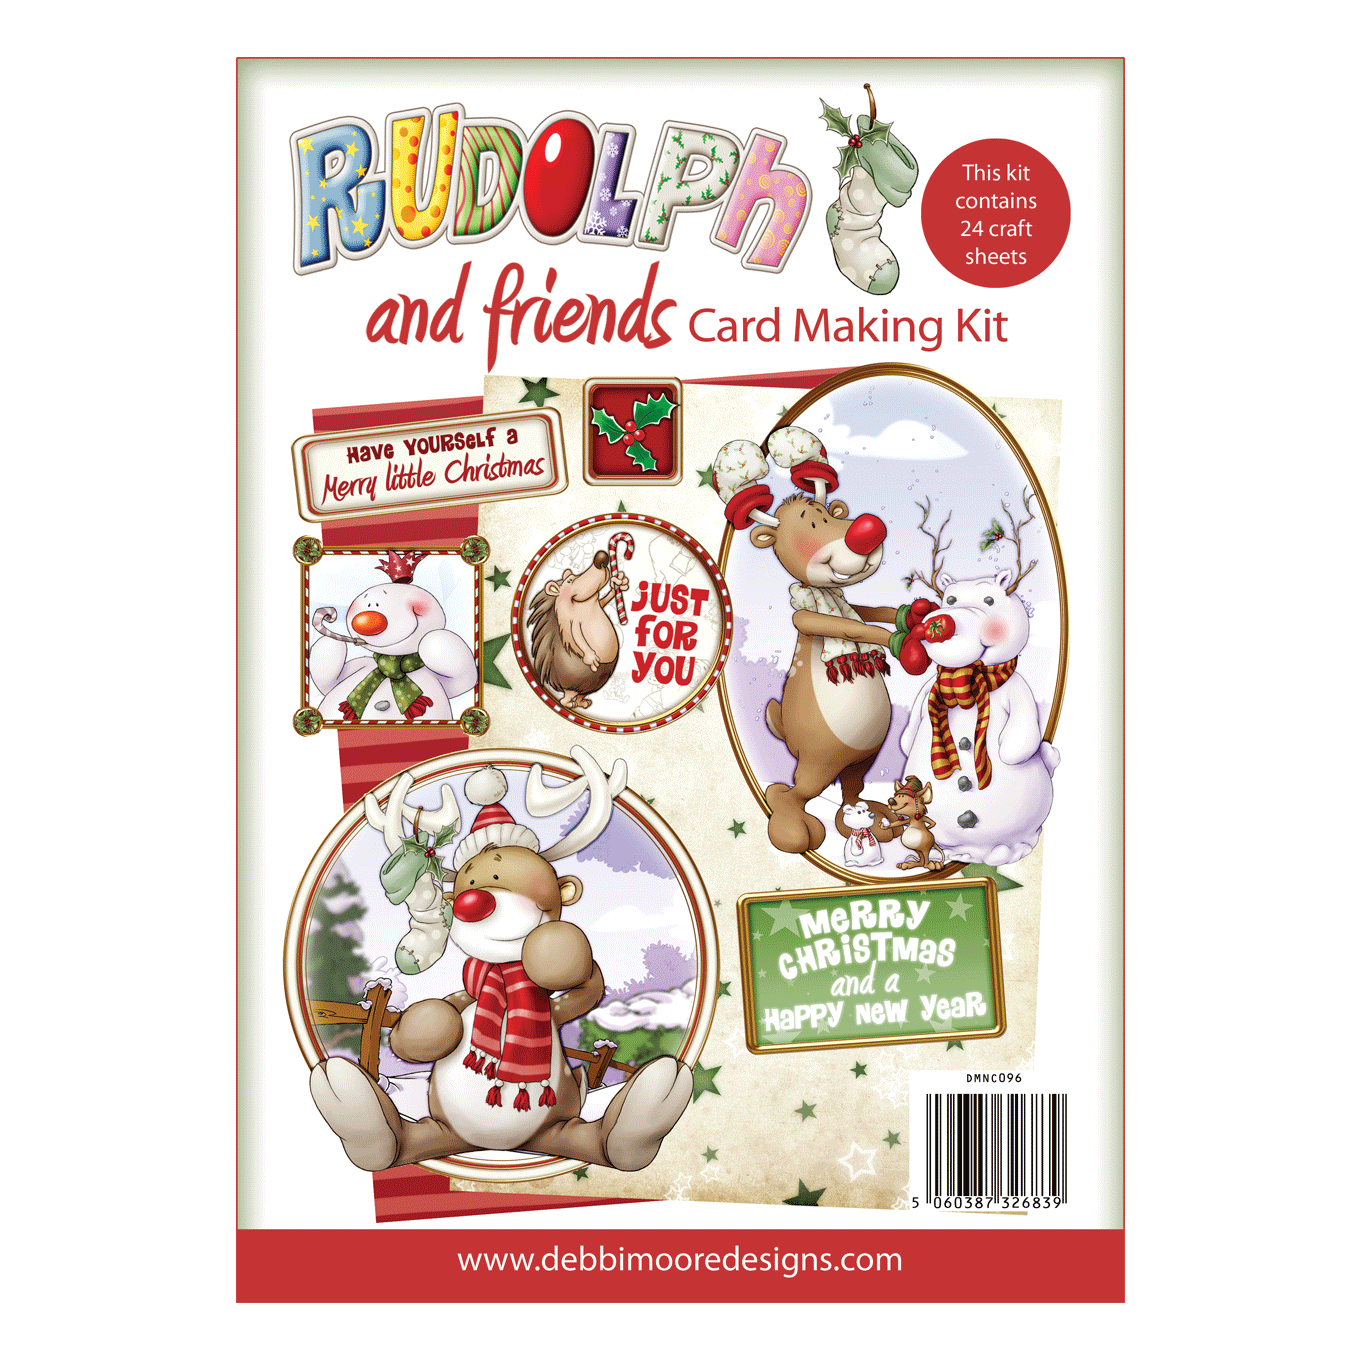 [DMNC096] Rudolph and Friends Cardmaking Kit